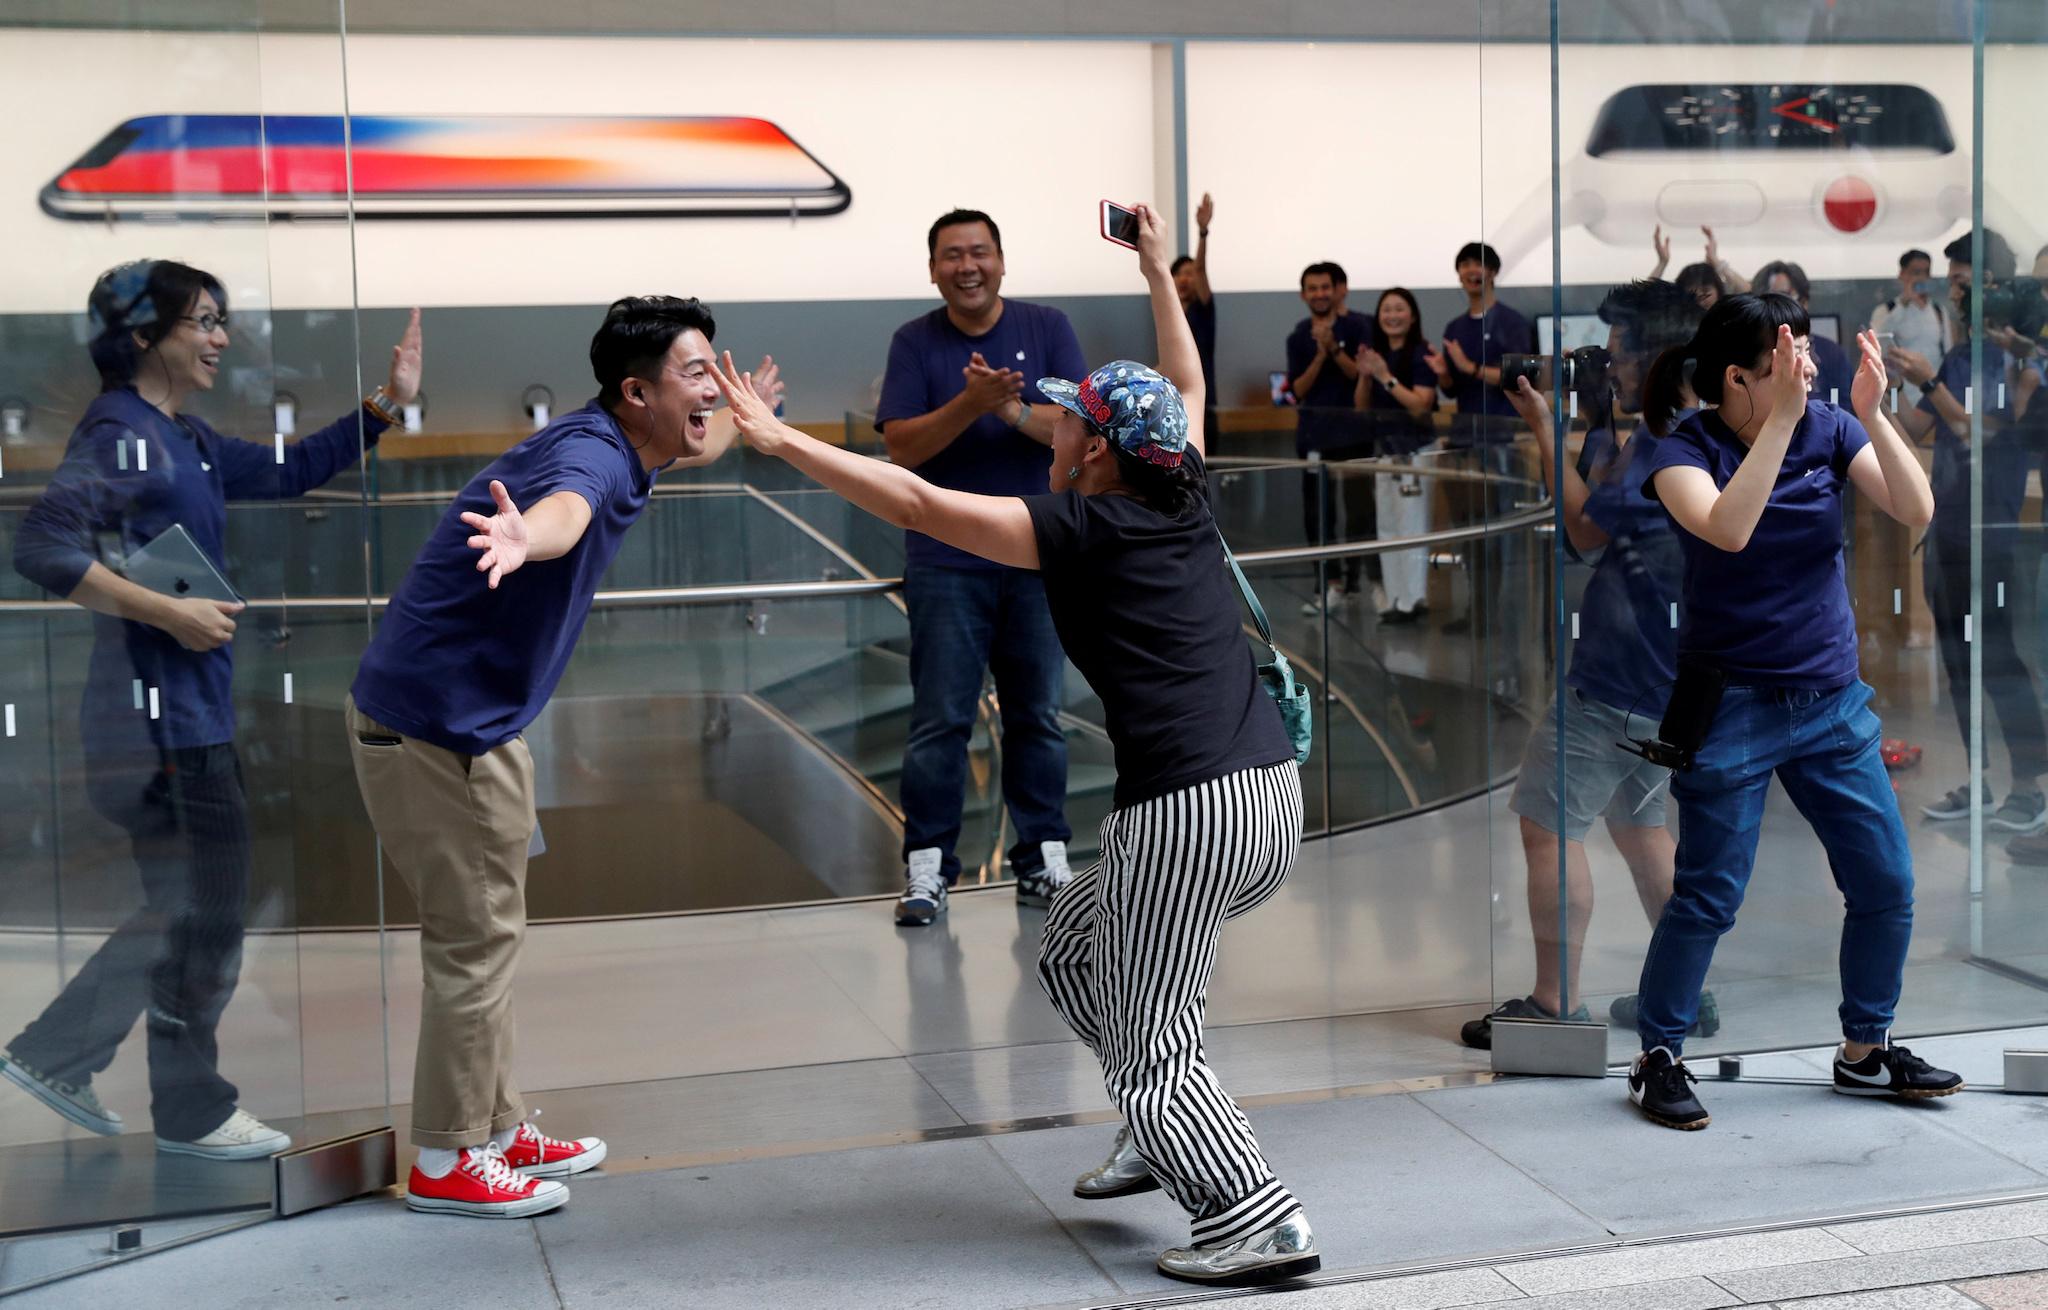 Apple fan Shoko Kimura (C), who has been waiting in line to purchase new Apple Watch, reacts with Apple Store staff as she enters the Apple Store in Tokyo's Omotesando shopping district, Japan, September 22, 2017